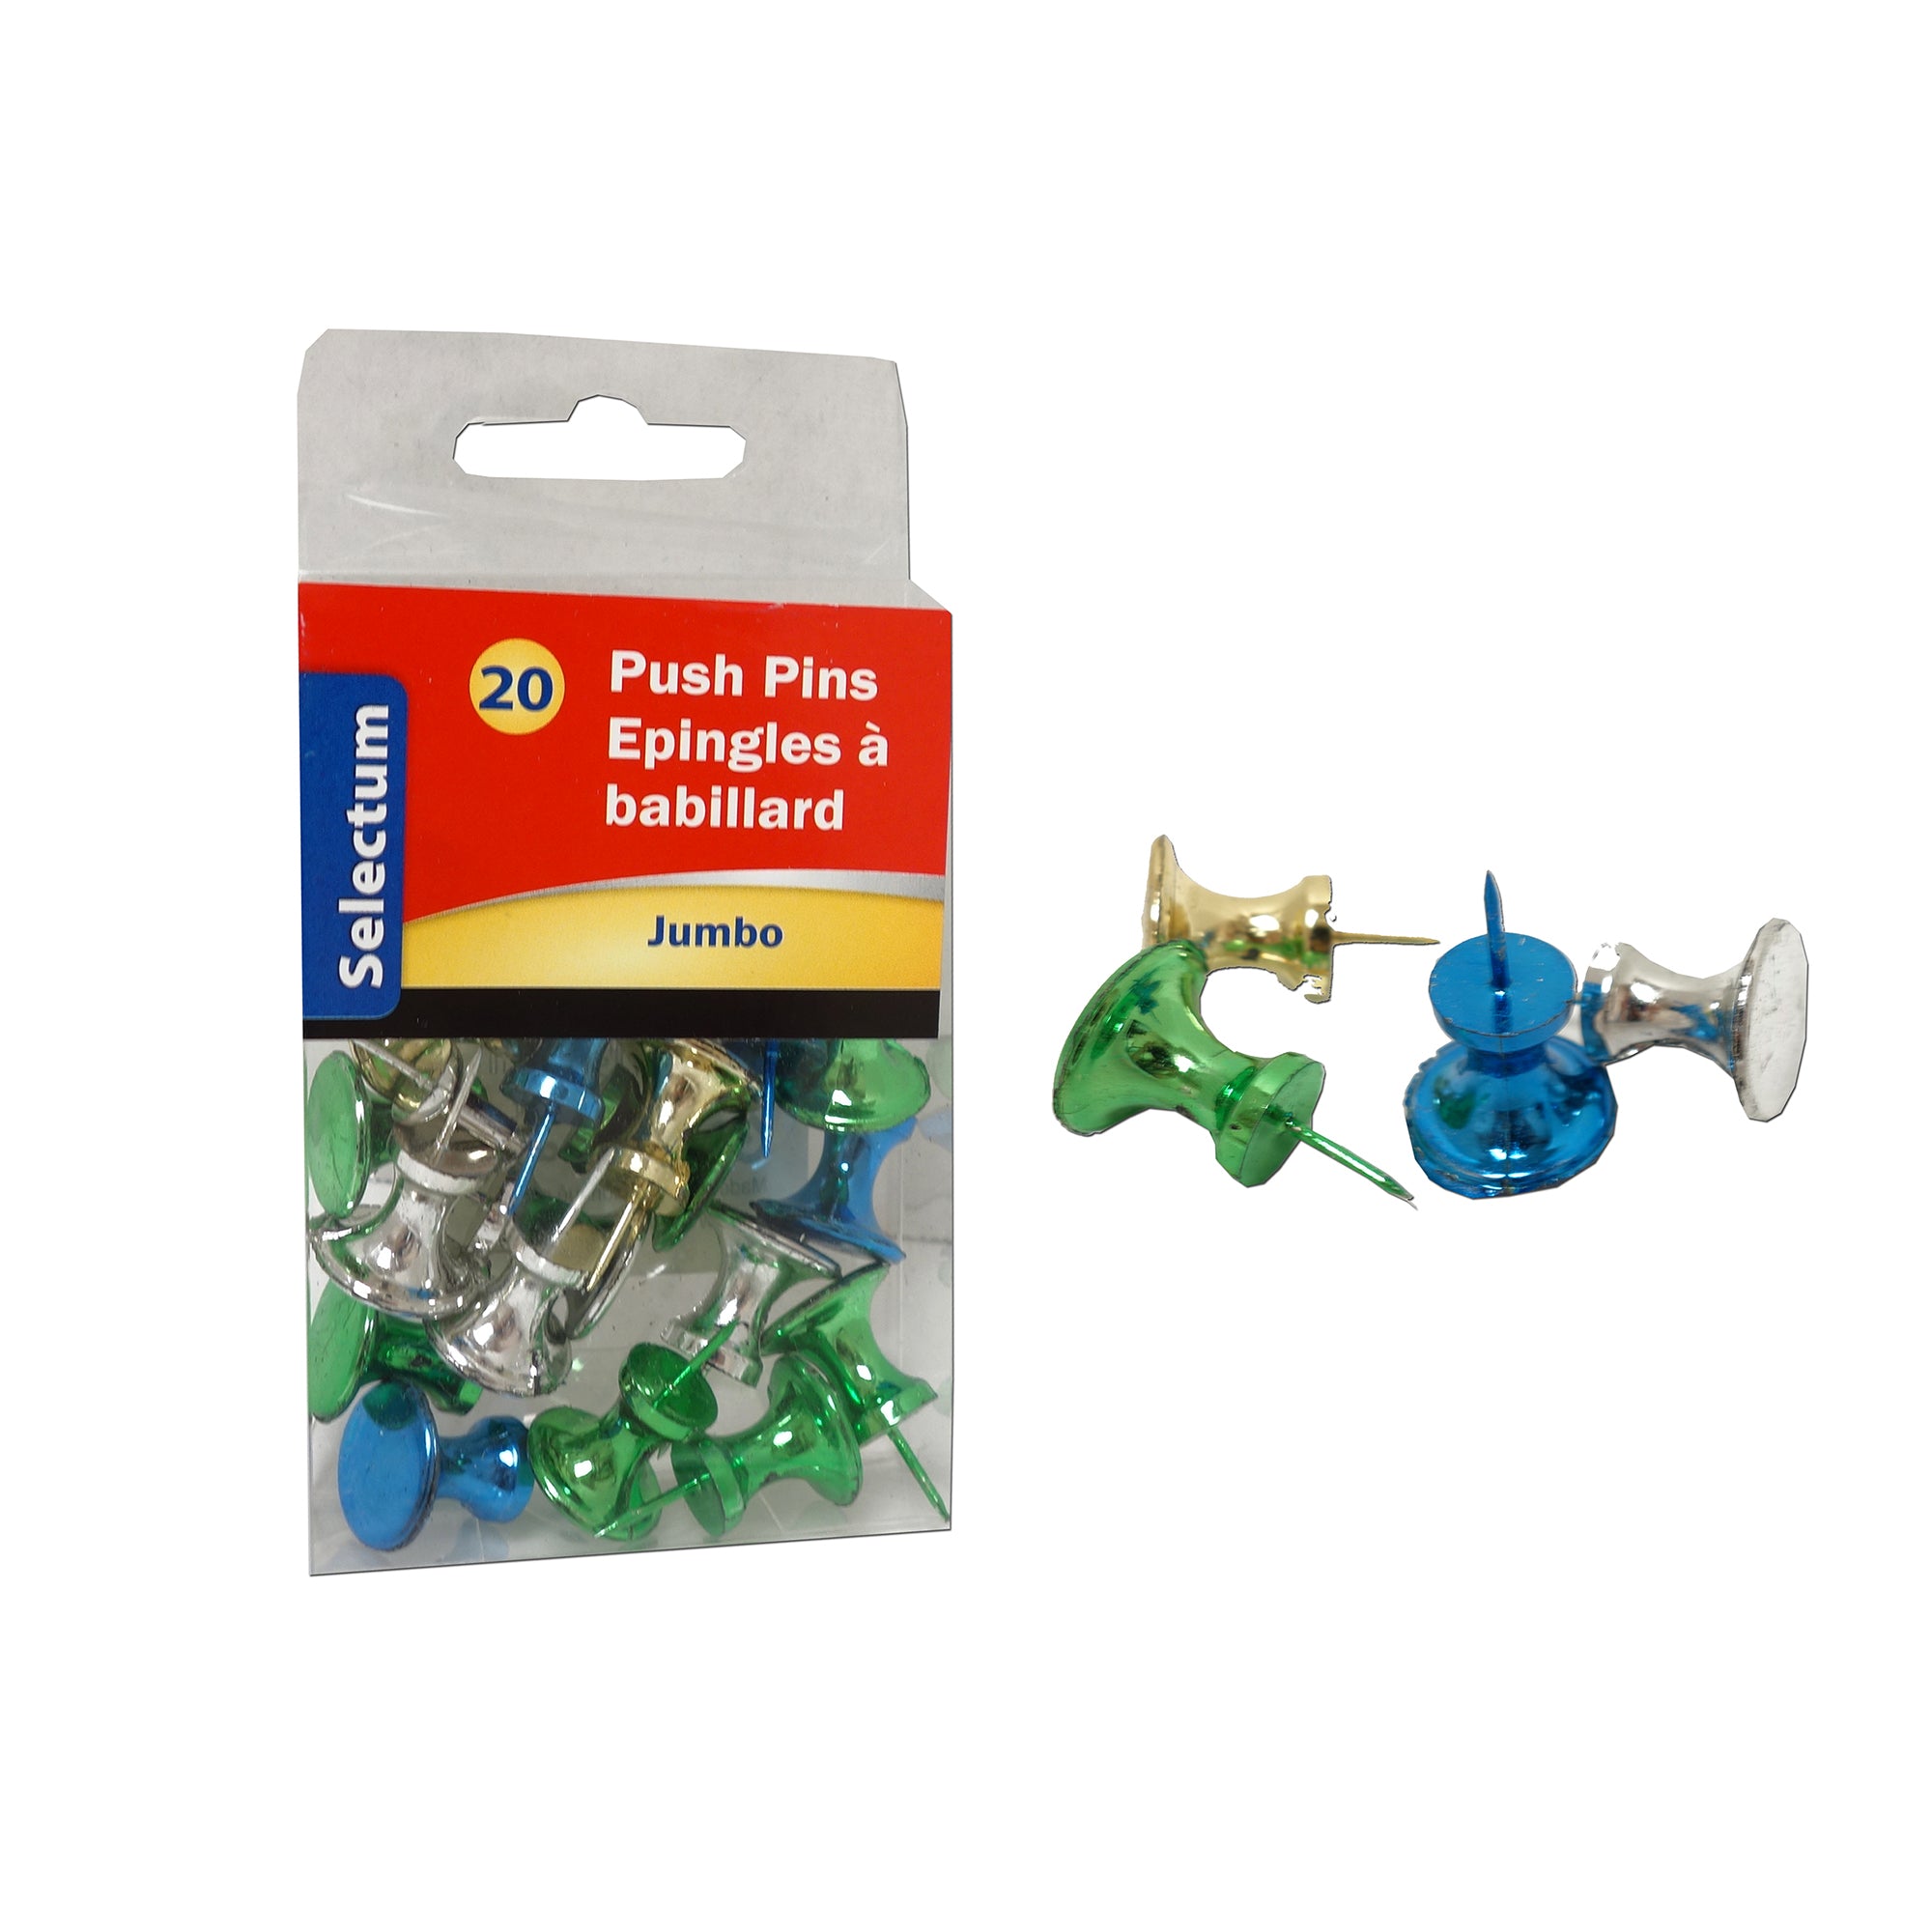 Buy Push Pins & Tacks Online at Best Price in India 